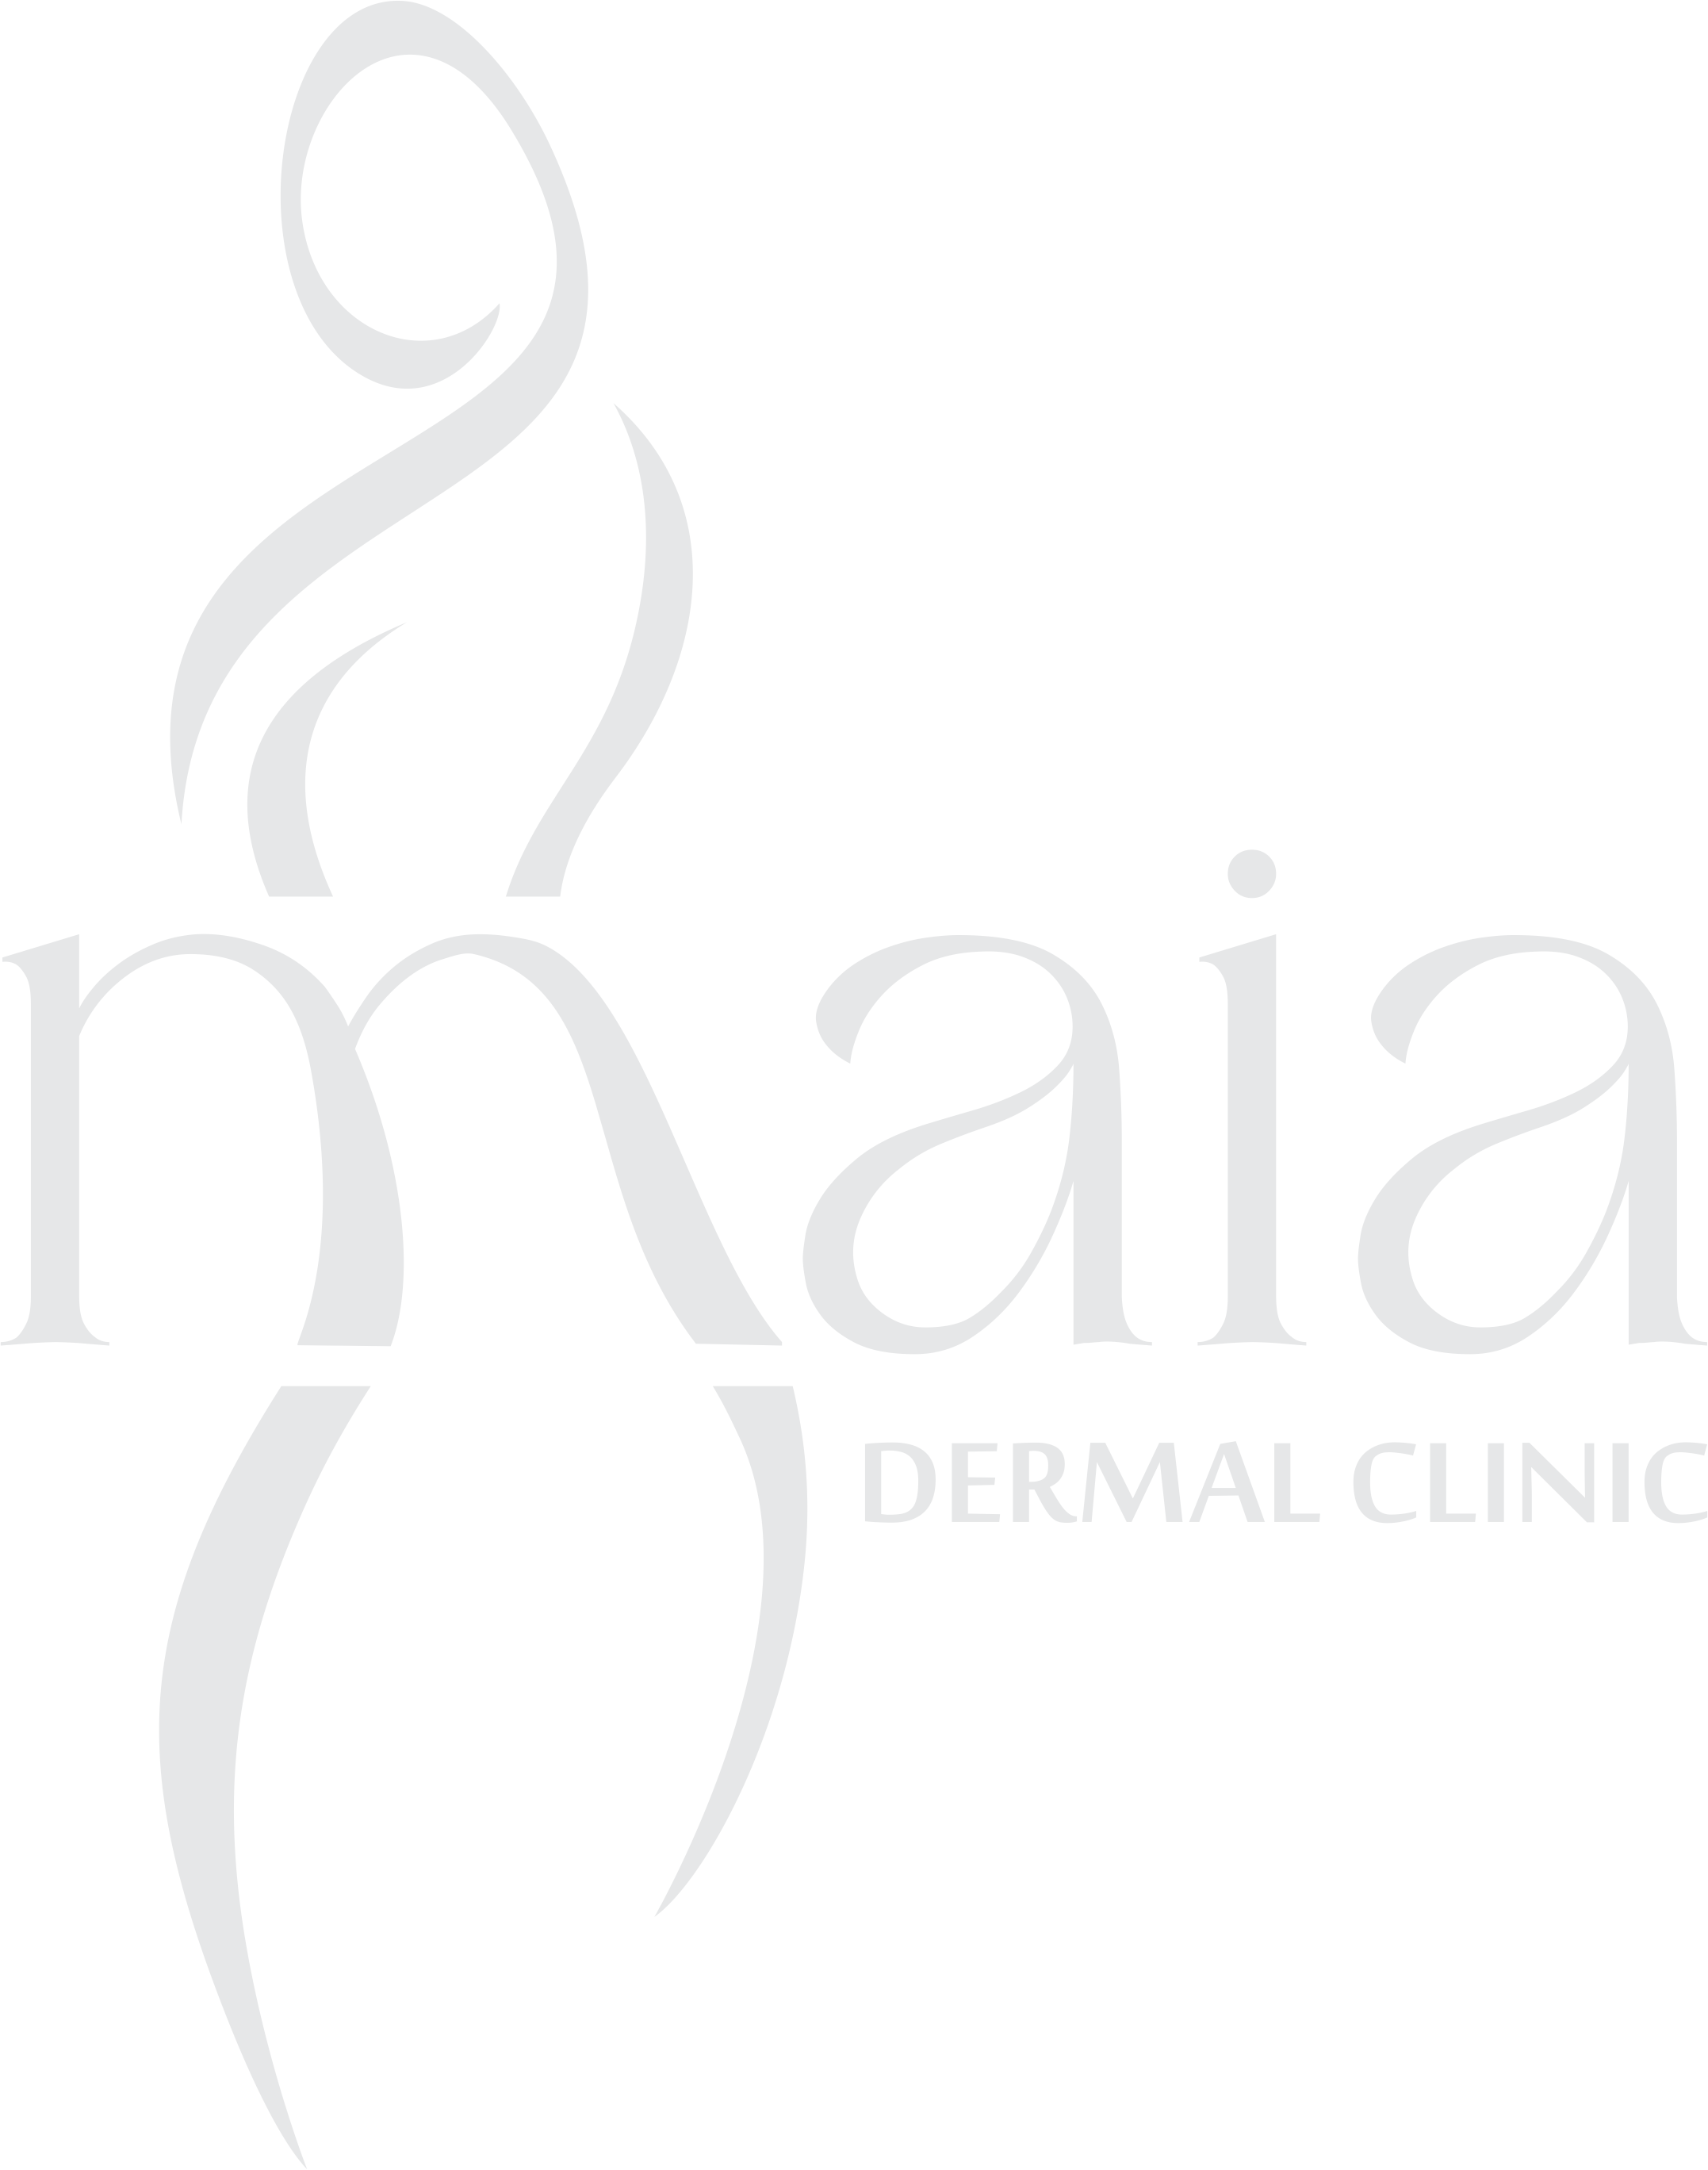 Maia clinic manchester